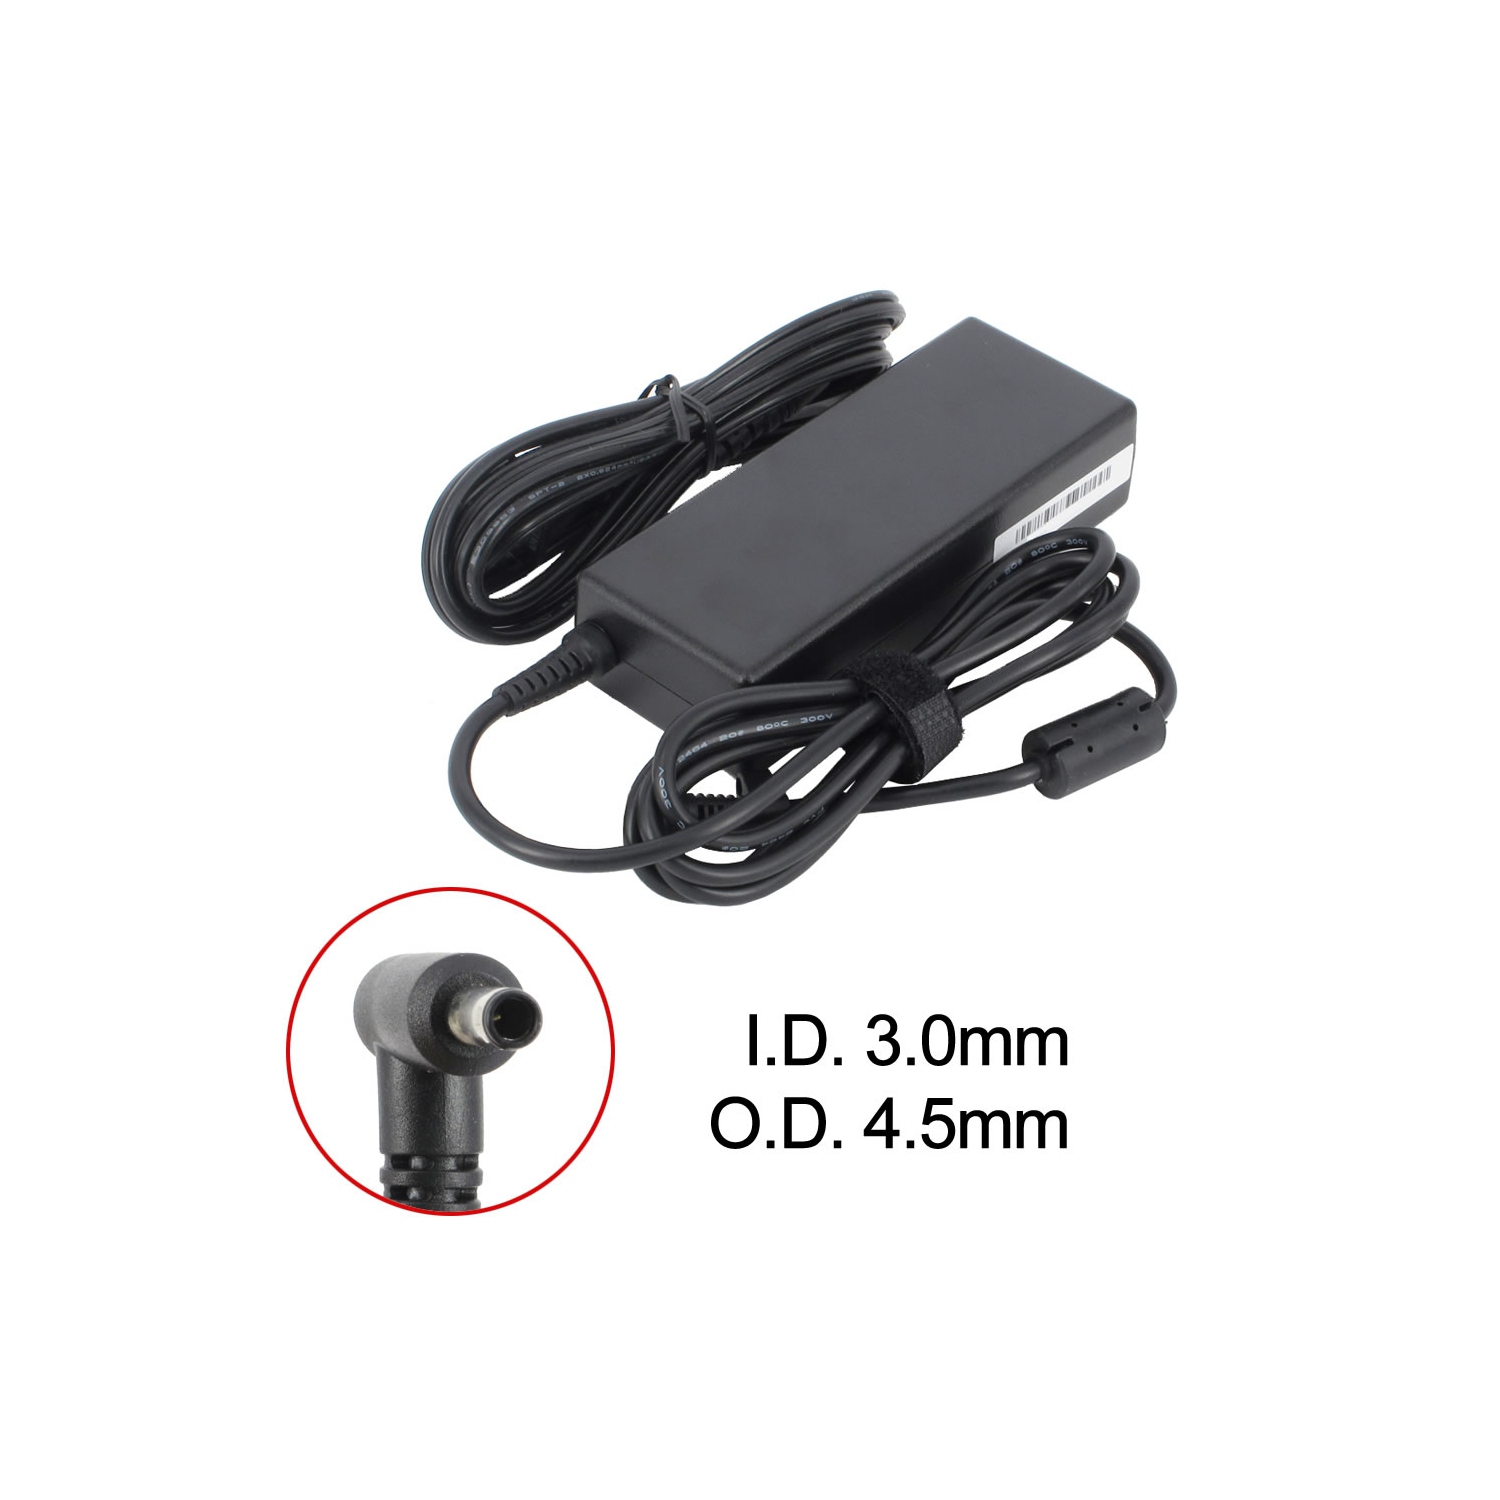 New Replacement Laptop AC Adapter for HP ProBook 440 G4, 719309-001, 741427-001, H6Y83AA, HSTNN-DA15, PA-1450-36HE